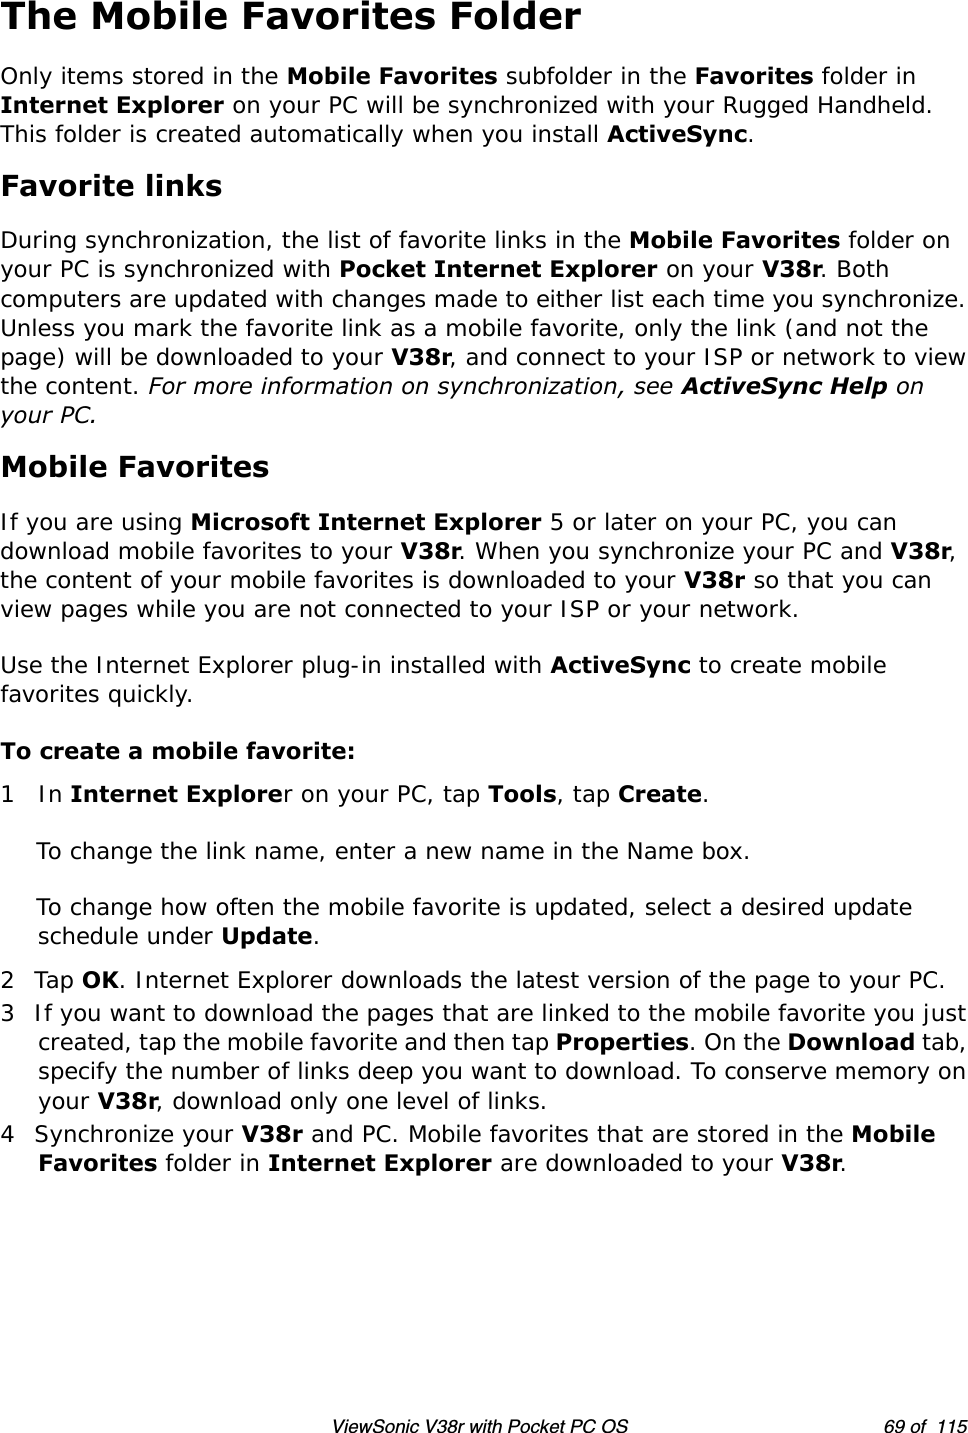 ViewSonic V38r with Pocket PC OS 69 of  115The Mobile Favorites FolderOnly items stored in the Mobile Favorites subfolder in the Favorites folder in Internet Explorer on your PC will be synchronized with your Rugged Handheld. This folder is created automatically when you install ActiveSync.Favorite linksDuring synchronization, the list of favorite links in the Mobile Favorites folder on your PC is synchronized with Pocket Internet Explorer on your V38r. Both computers are updated with changes made to either list each time you synchronize. Unless you mark the favorite link as a mobile favorite, only the link (and not the page) will be downloaded to your V38r, and connect to your ISP or network to view the content. For more information on synchronization, see ActiveSync Help on your PC.Mobile FavoritesIf you are using Microsoft Internet Explorer 5 or later on your PC, you can download mobile favorites to your V38r. When you synchronize your PC and V38r, the content of your mobile favorites is downloaded to your V38r so that you can view pages while you are not connected to your ISP or your network.Use the Internet Explorer plug-in installed with ActiveSync to create mobile favorites quickly.To create a mobile favorite:1In Internet Explorer on your PC, tap Tools, tap Create.To change the link name, enter a new name in the Name box. To change how often the mobile favorite is updated, select a desired update schedule under Update.2Tap OK. Internet Explorer downloads the latest version of the page to your PC.3 If you want to download the pages that are linked to the mobile favorite you just created, tap the mobile favorite and then tap Properties. On the Download tab, specify the number of links deep you want to download. To conserve memory on your V38r, download only one level of links.4 Synchronize your V38r and PC. Mobile favorites that are stored in the Mobile Favorites folder in Internet Explorer are downloaded to your V38r.